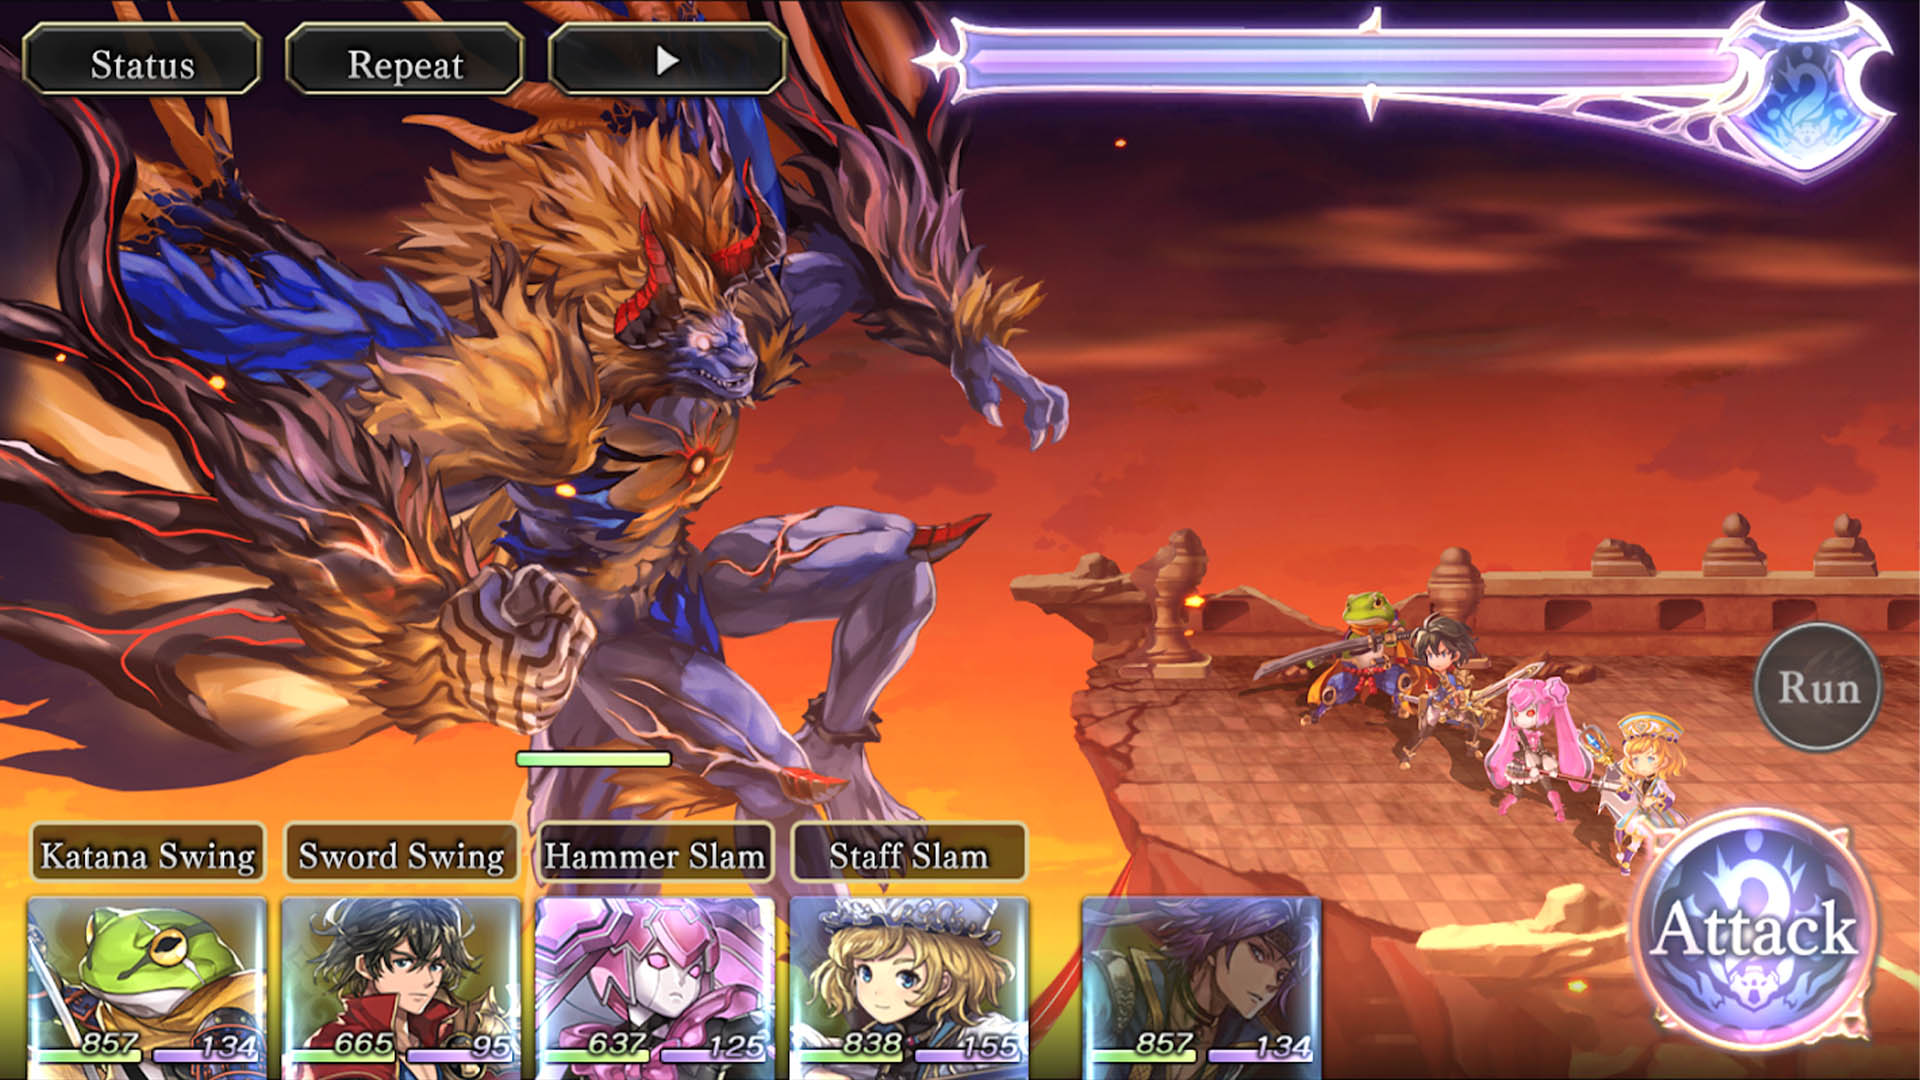 15 best RPGs for Android for both jRPG and action RPG fans